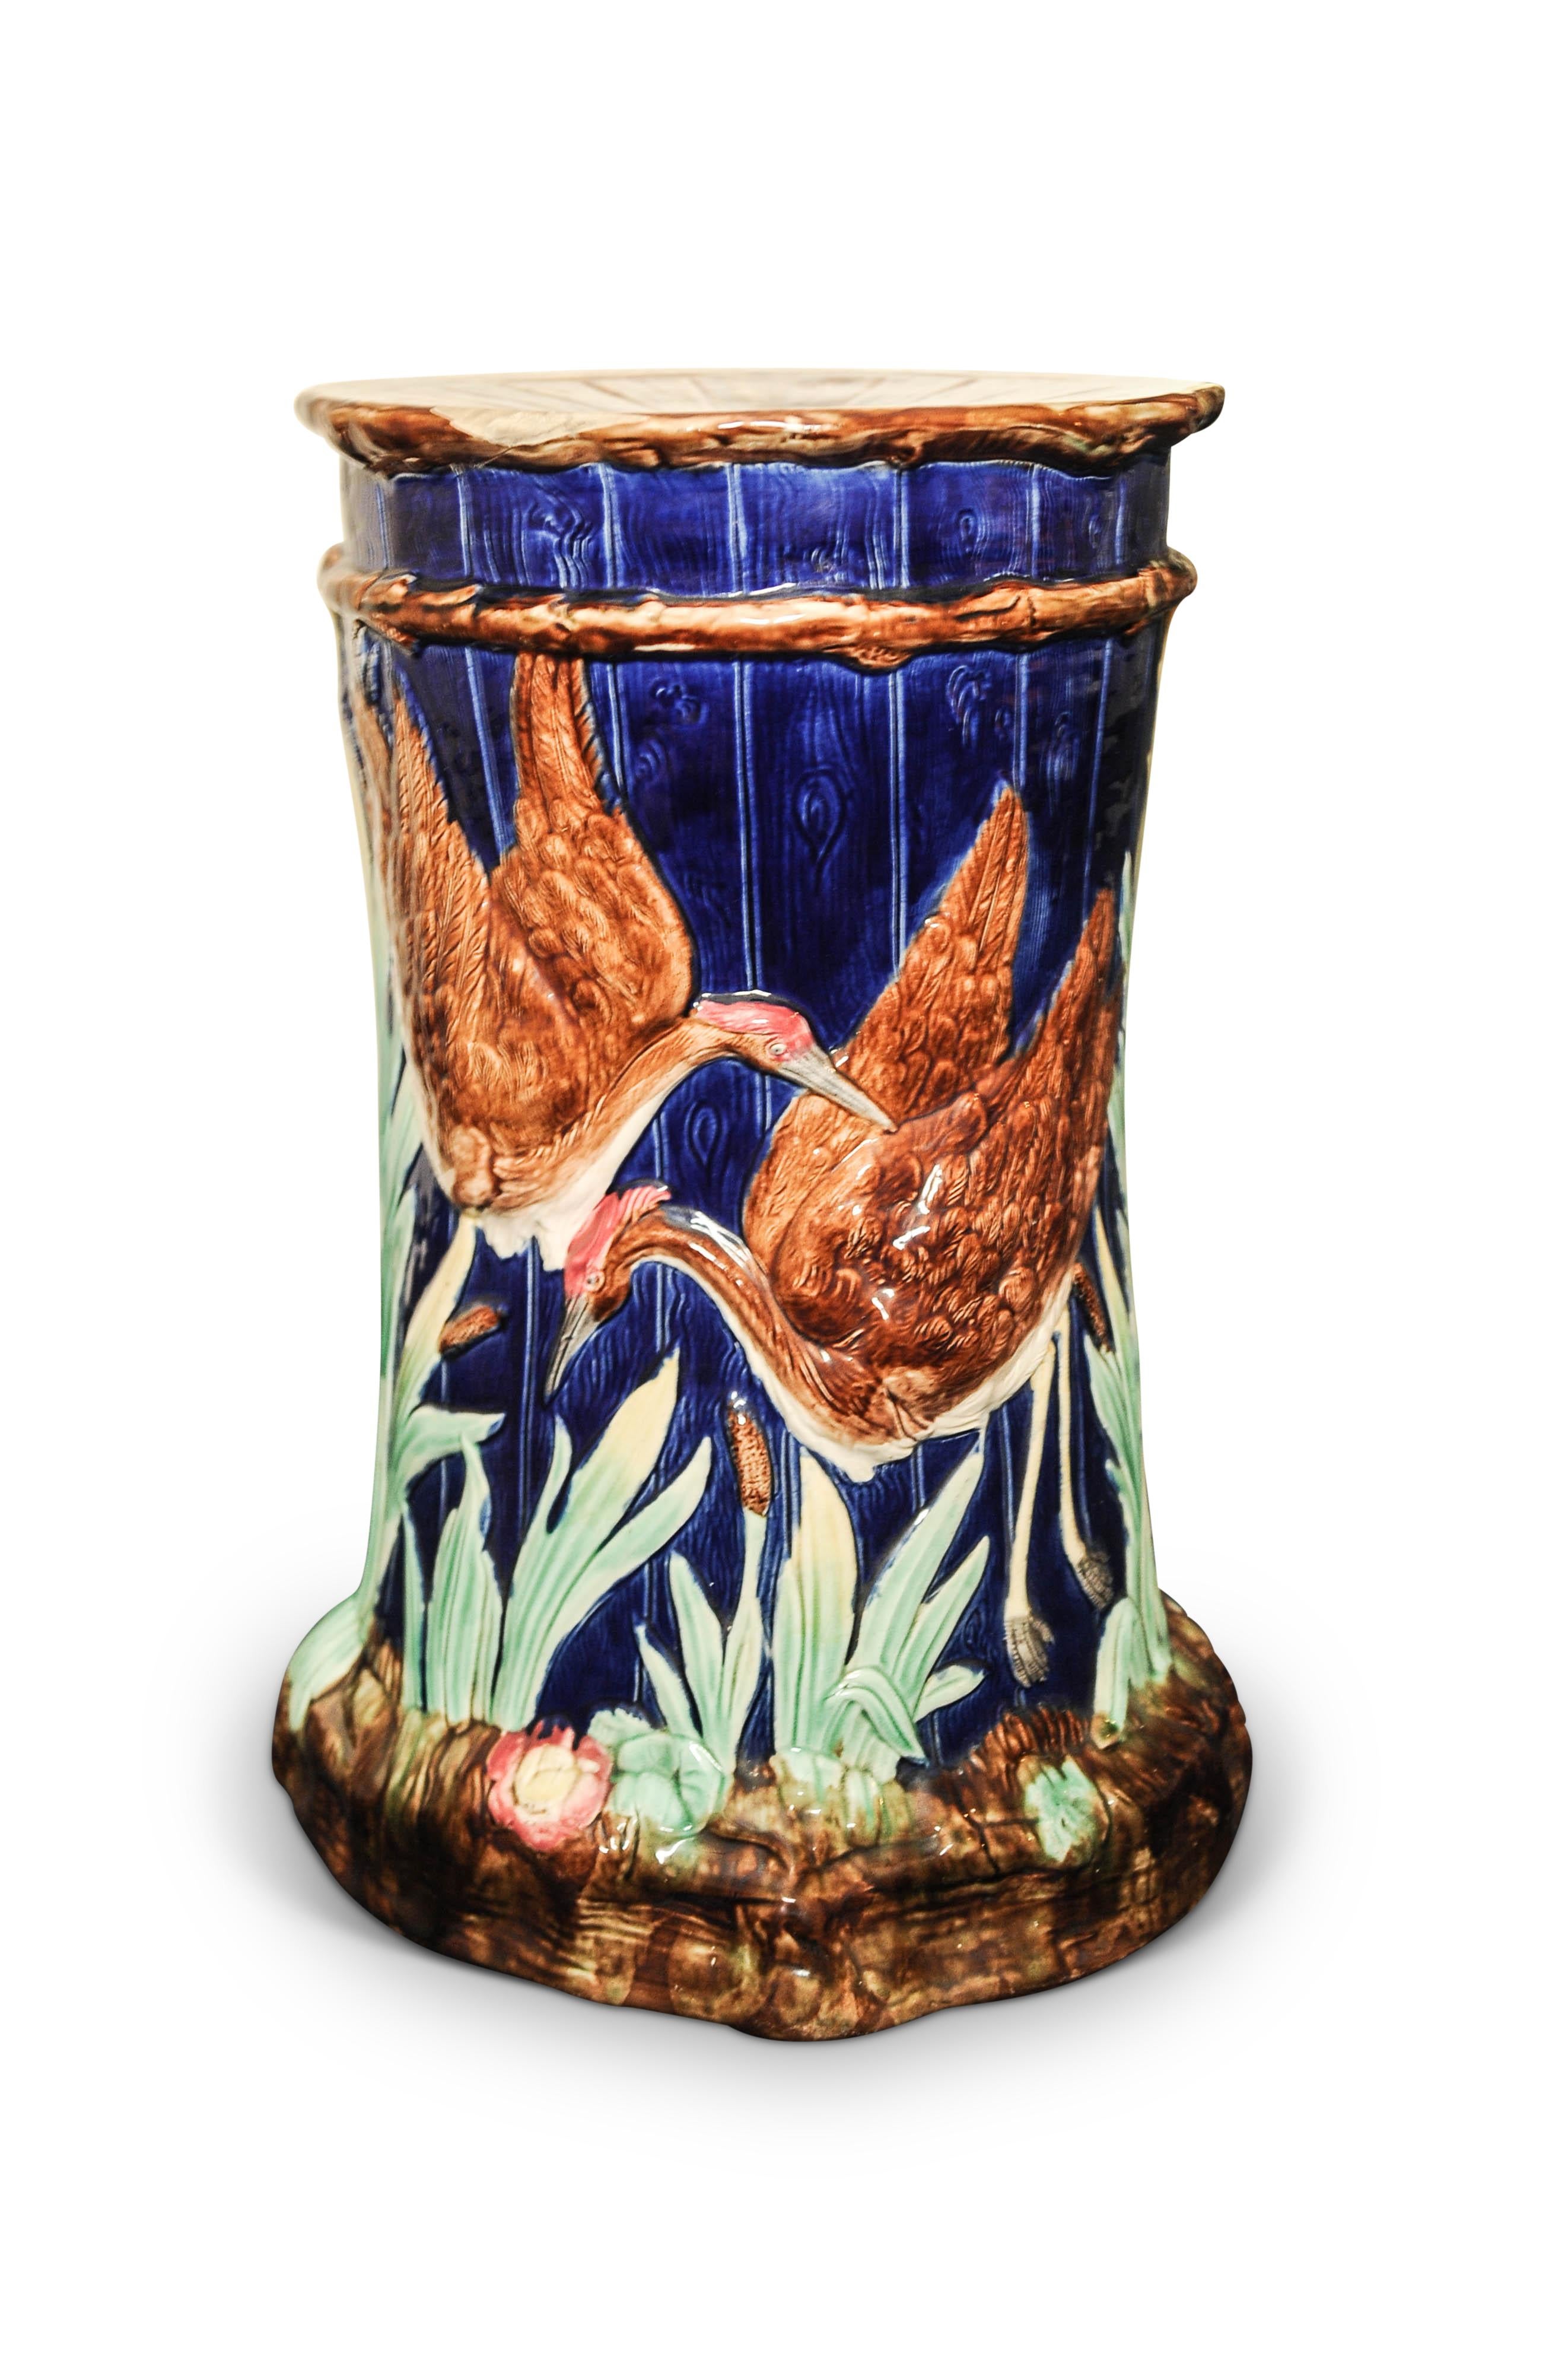 A late 19th century Art Nouveau Thomas Forester Majolica ceramic garden stool in the Numidian crane pattern, painted with a cobalt blue ground with raised cranes and foliage, with a pierced seat to the top, circa 1881-1900.

Thomas Forester & Sons